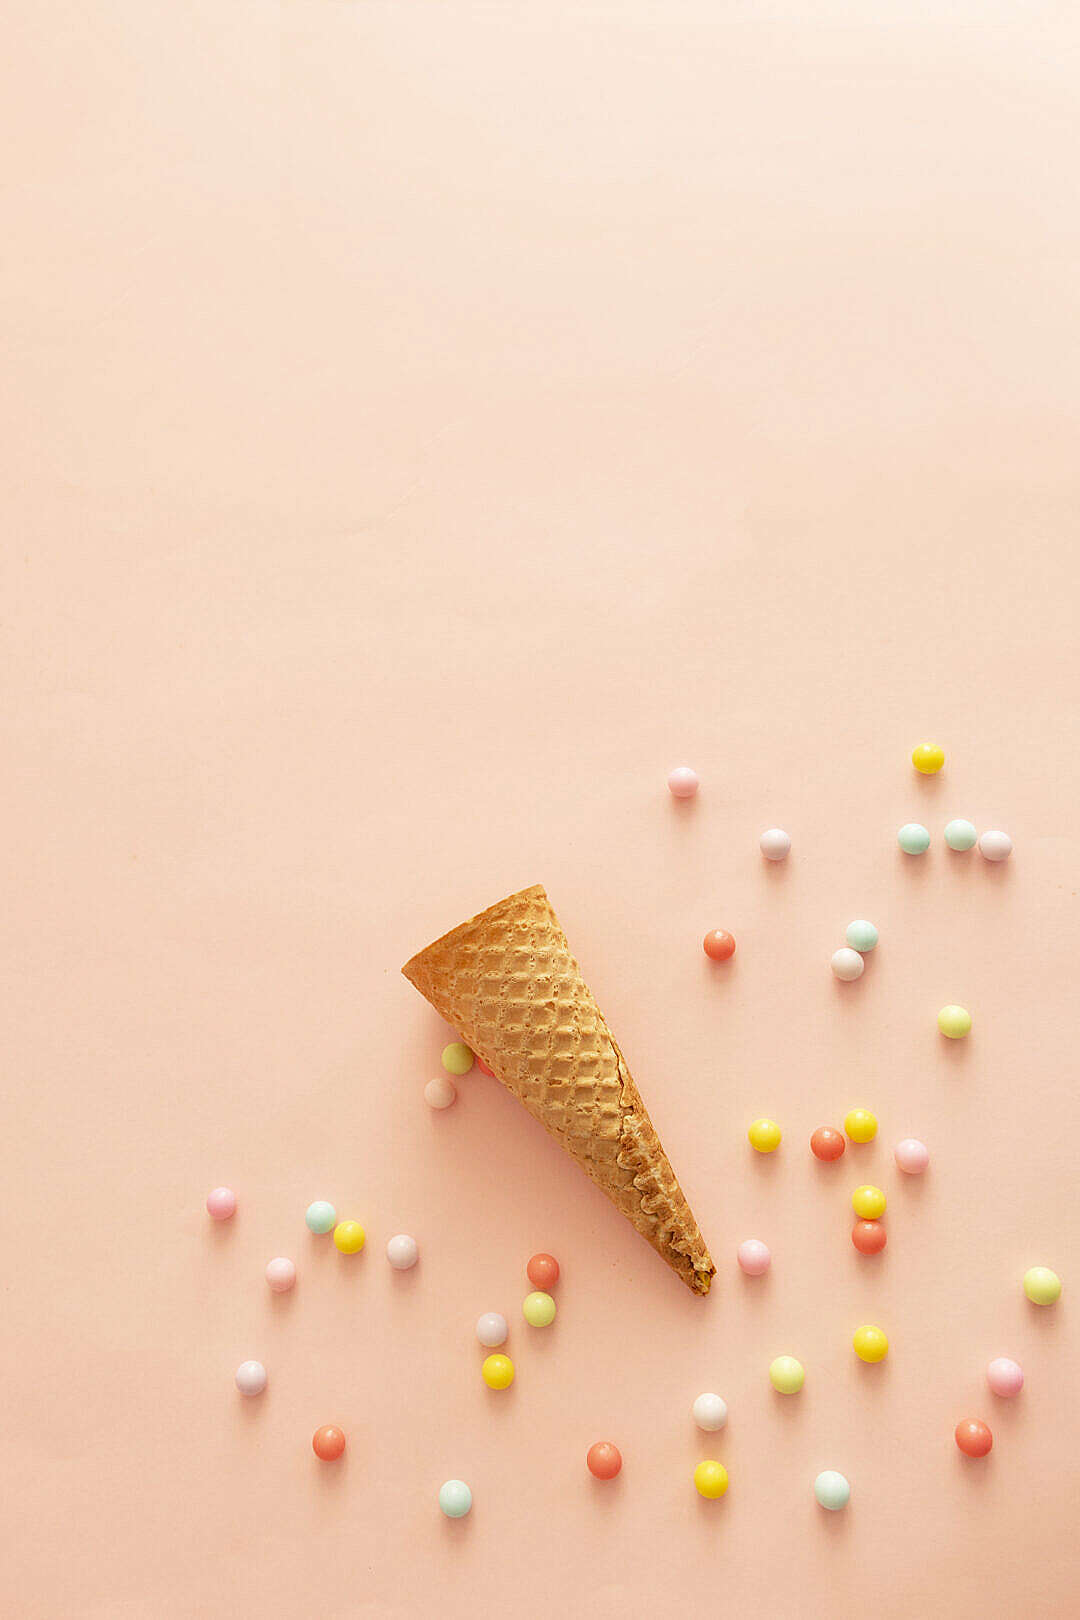 Download Sweet Colors and Ice Cream Cone FREE Stock Photo